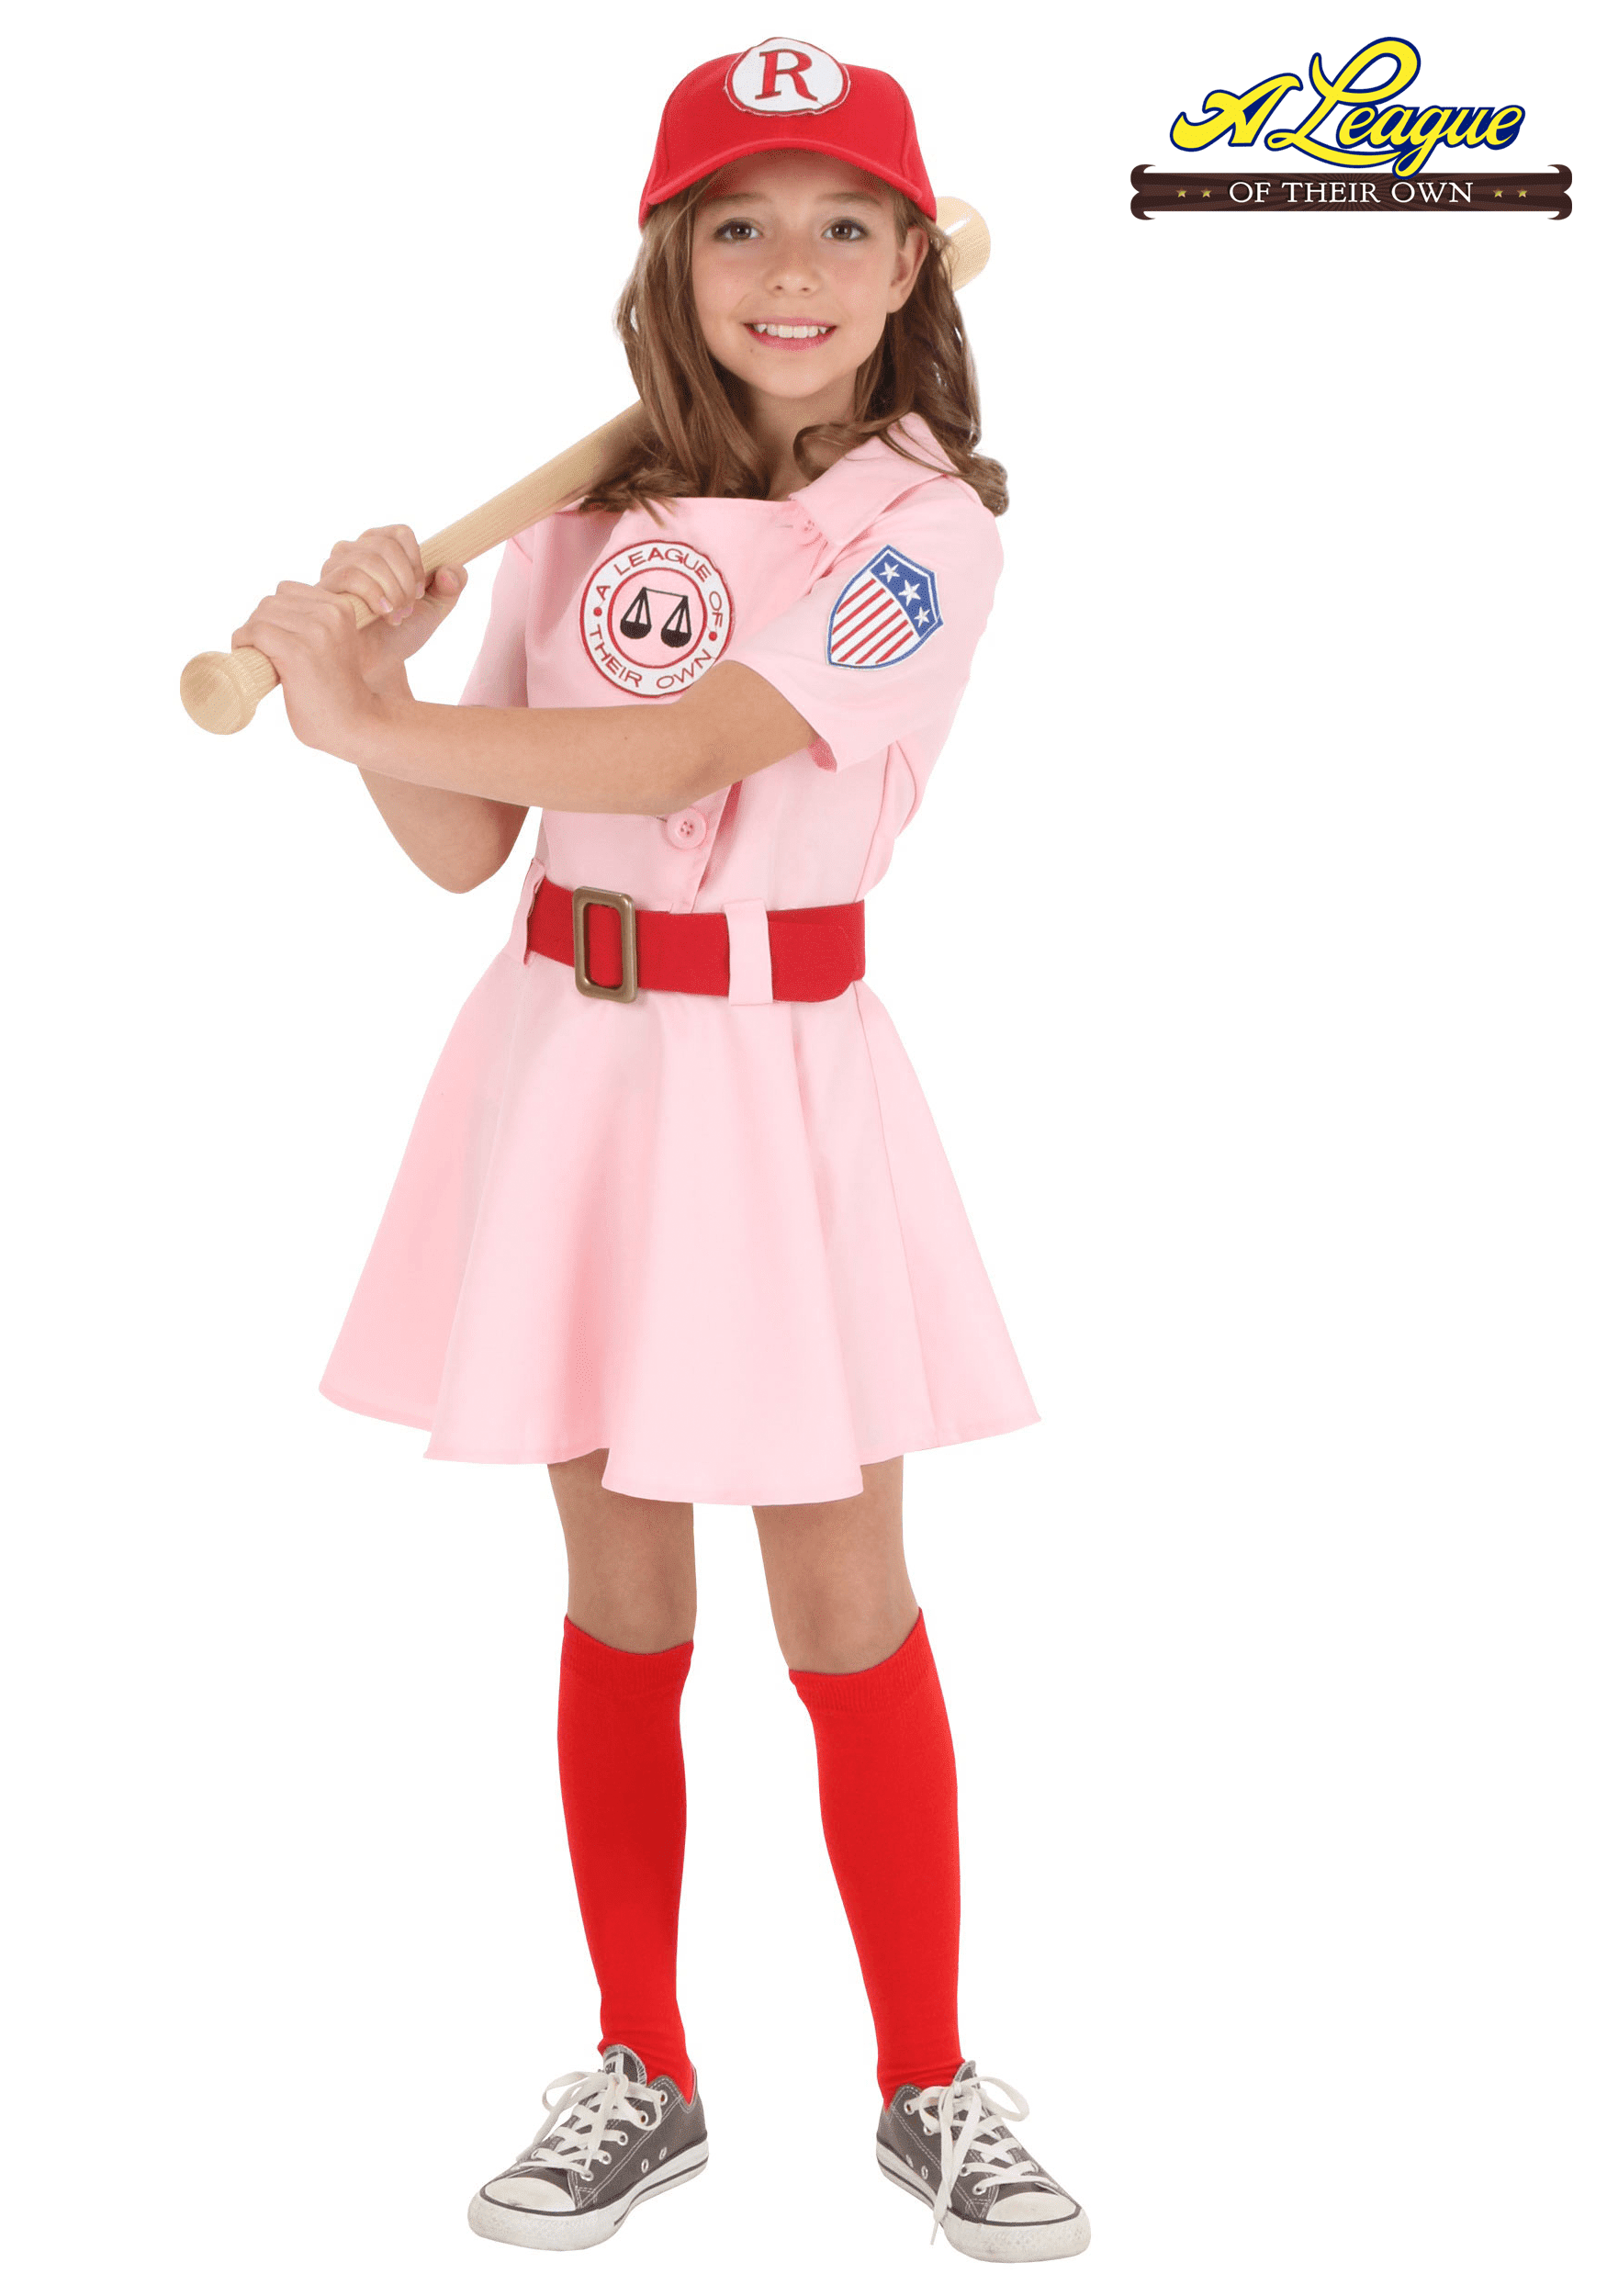 League of Their Own Baseball Uniform With Red Trim Sizes 2T 